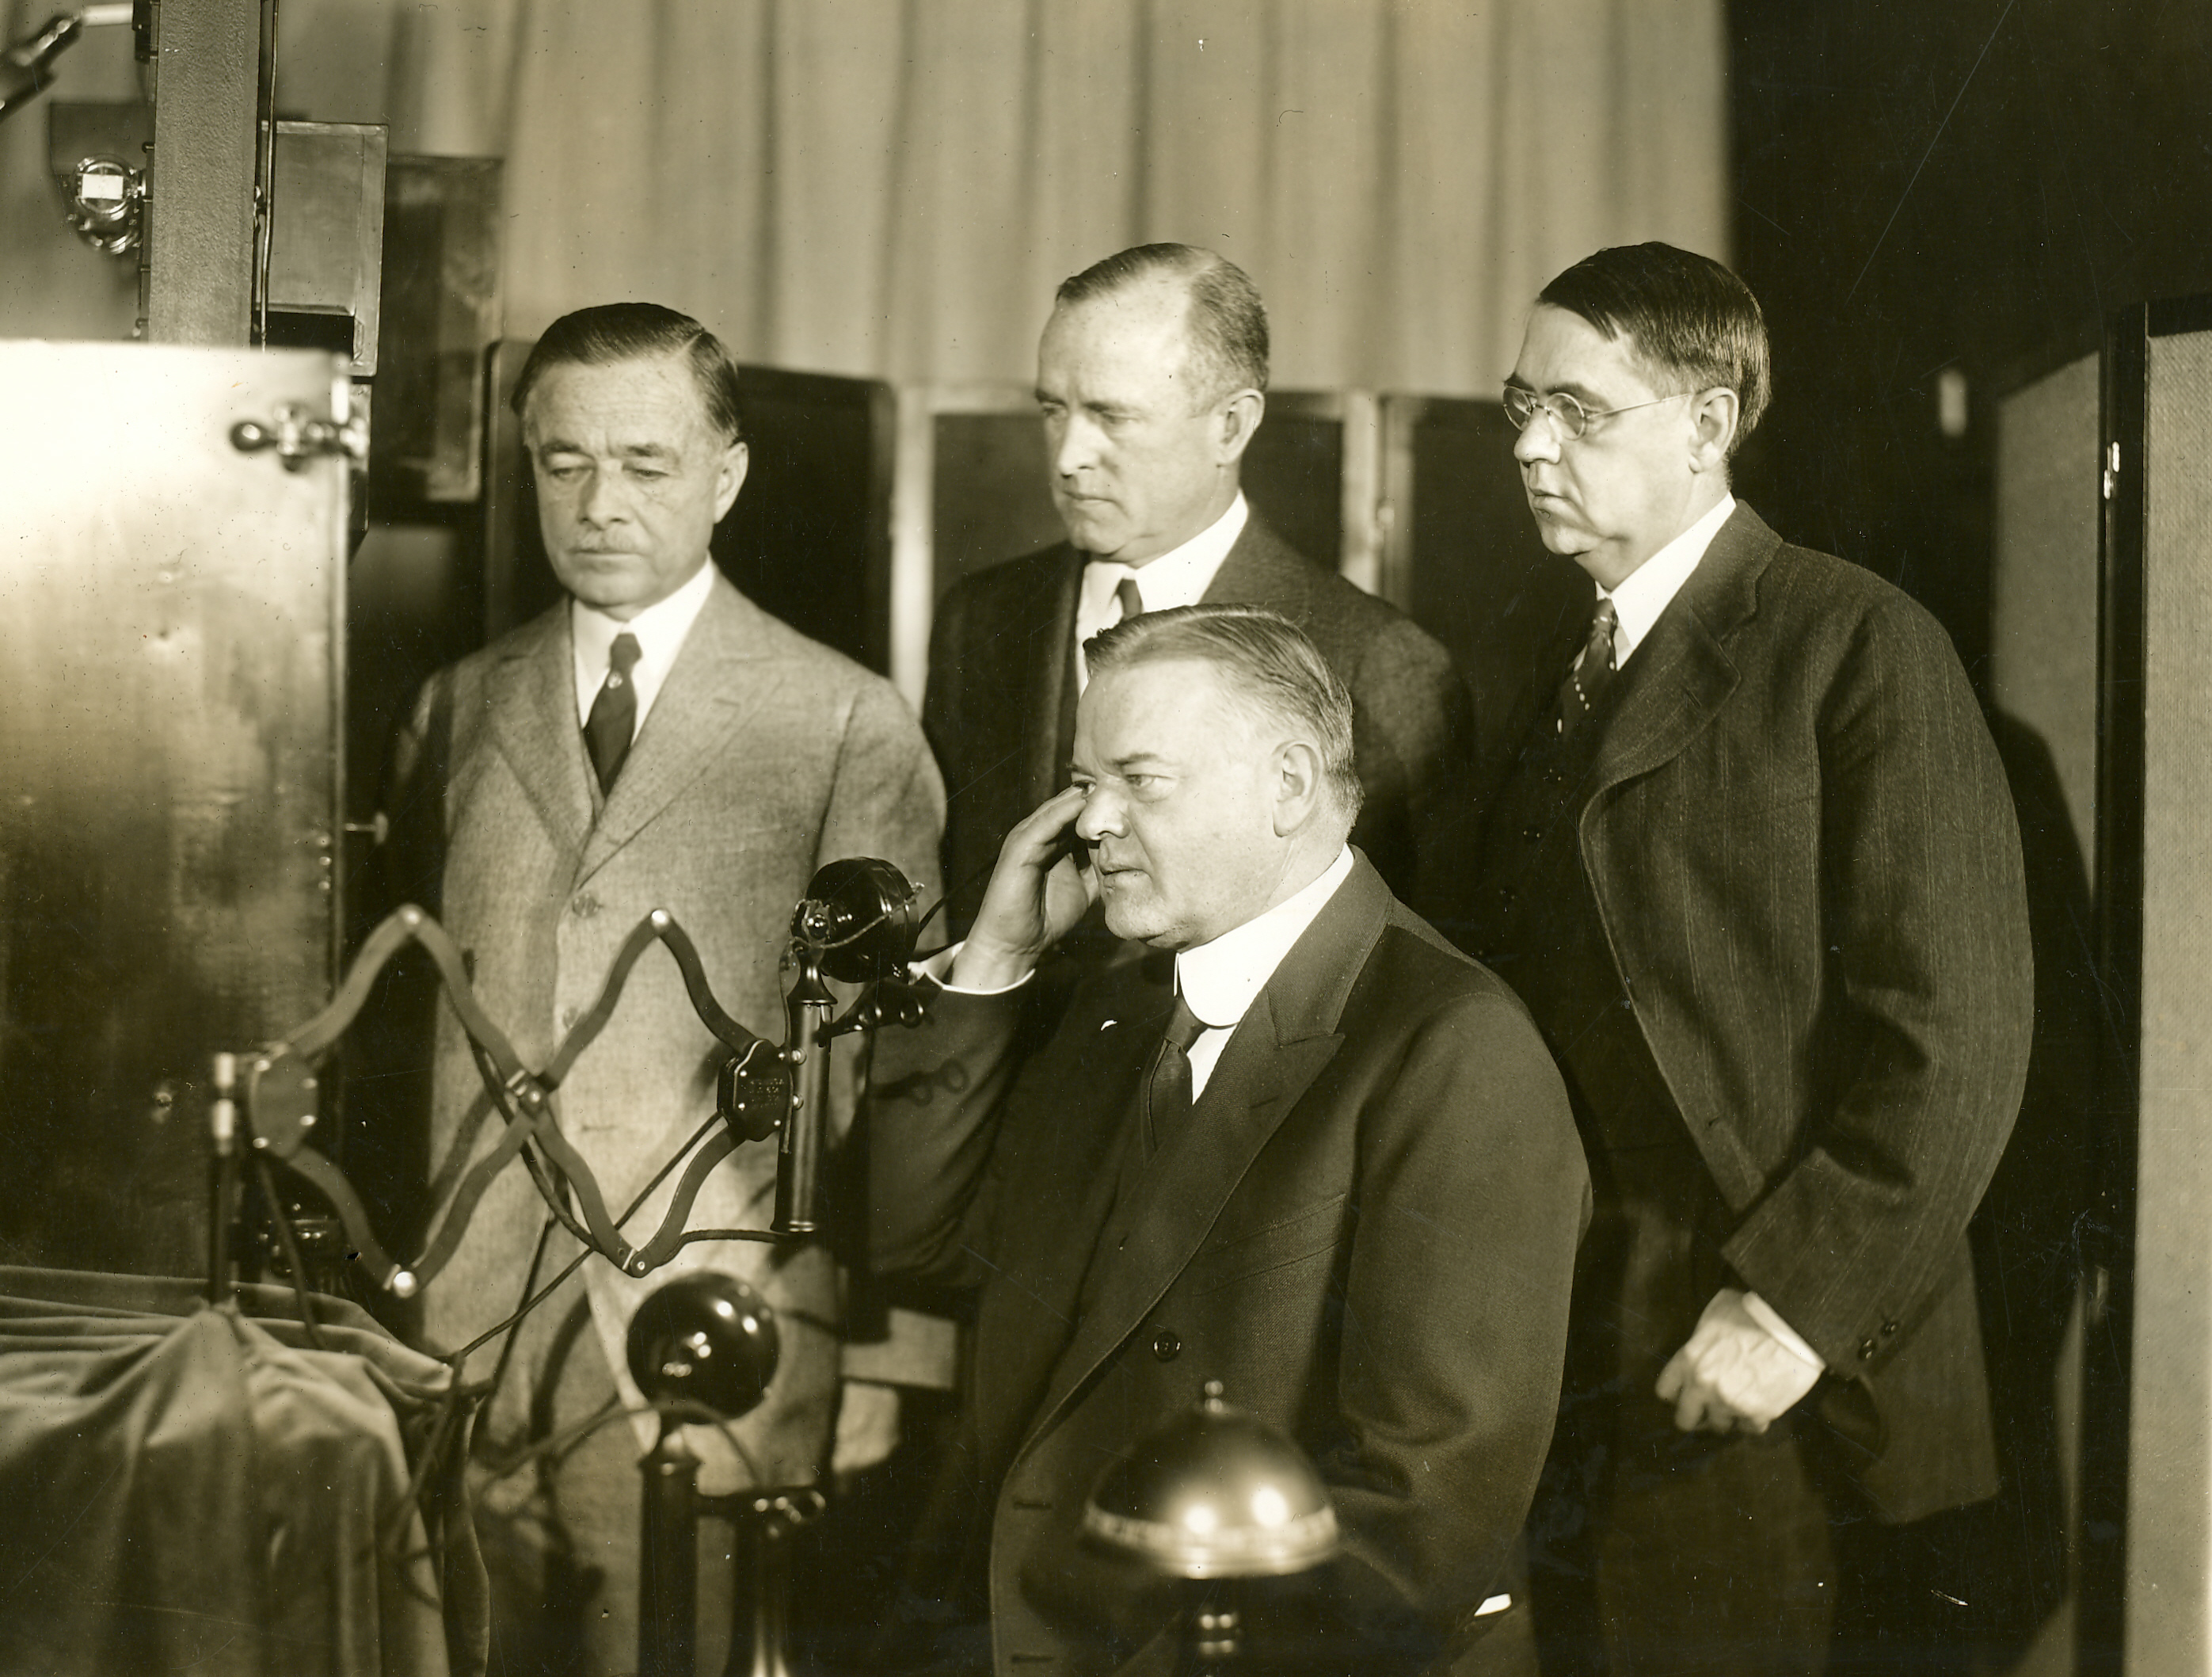 The first Public one-way TV Demo call, with Herbert Hoover in Washington, D.C. (Courtesy AT&T Archives and History Center)